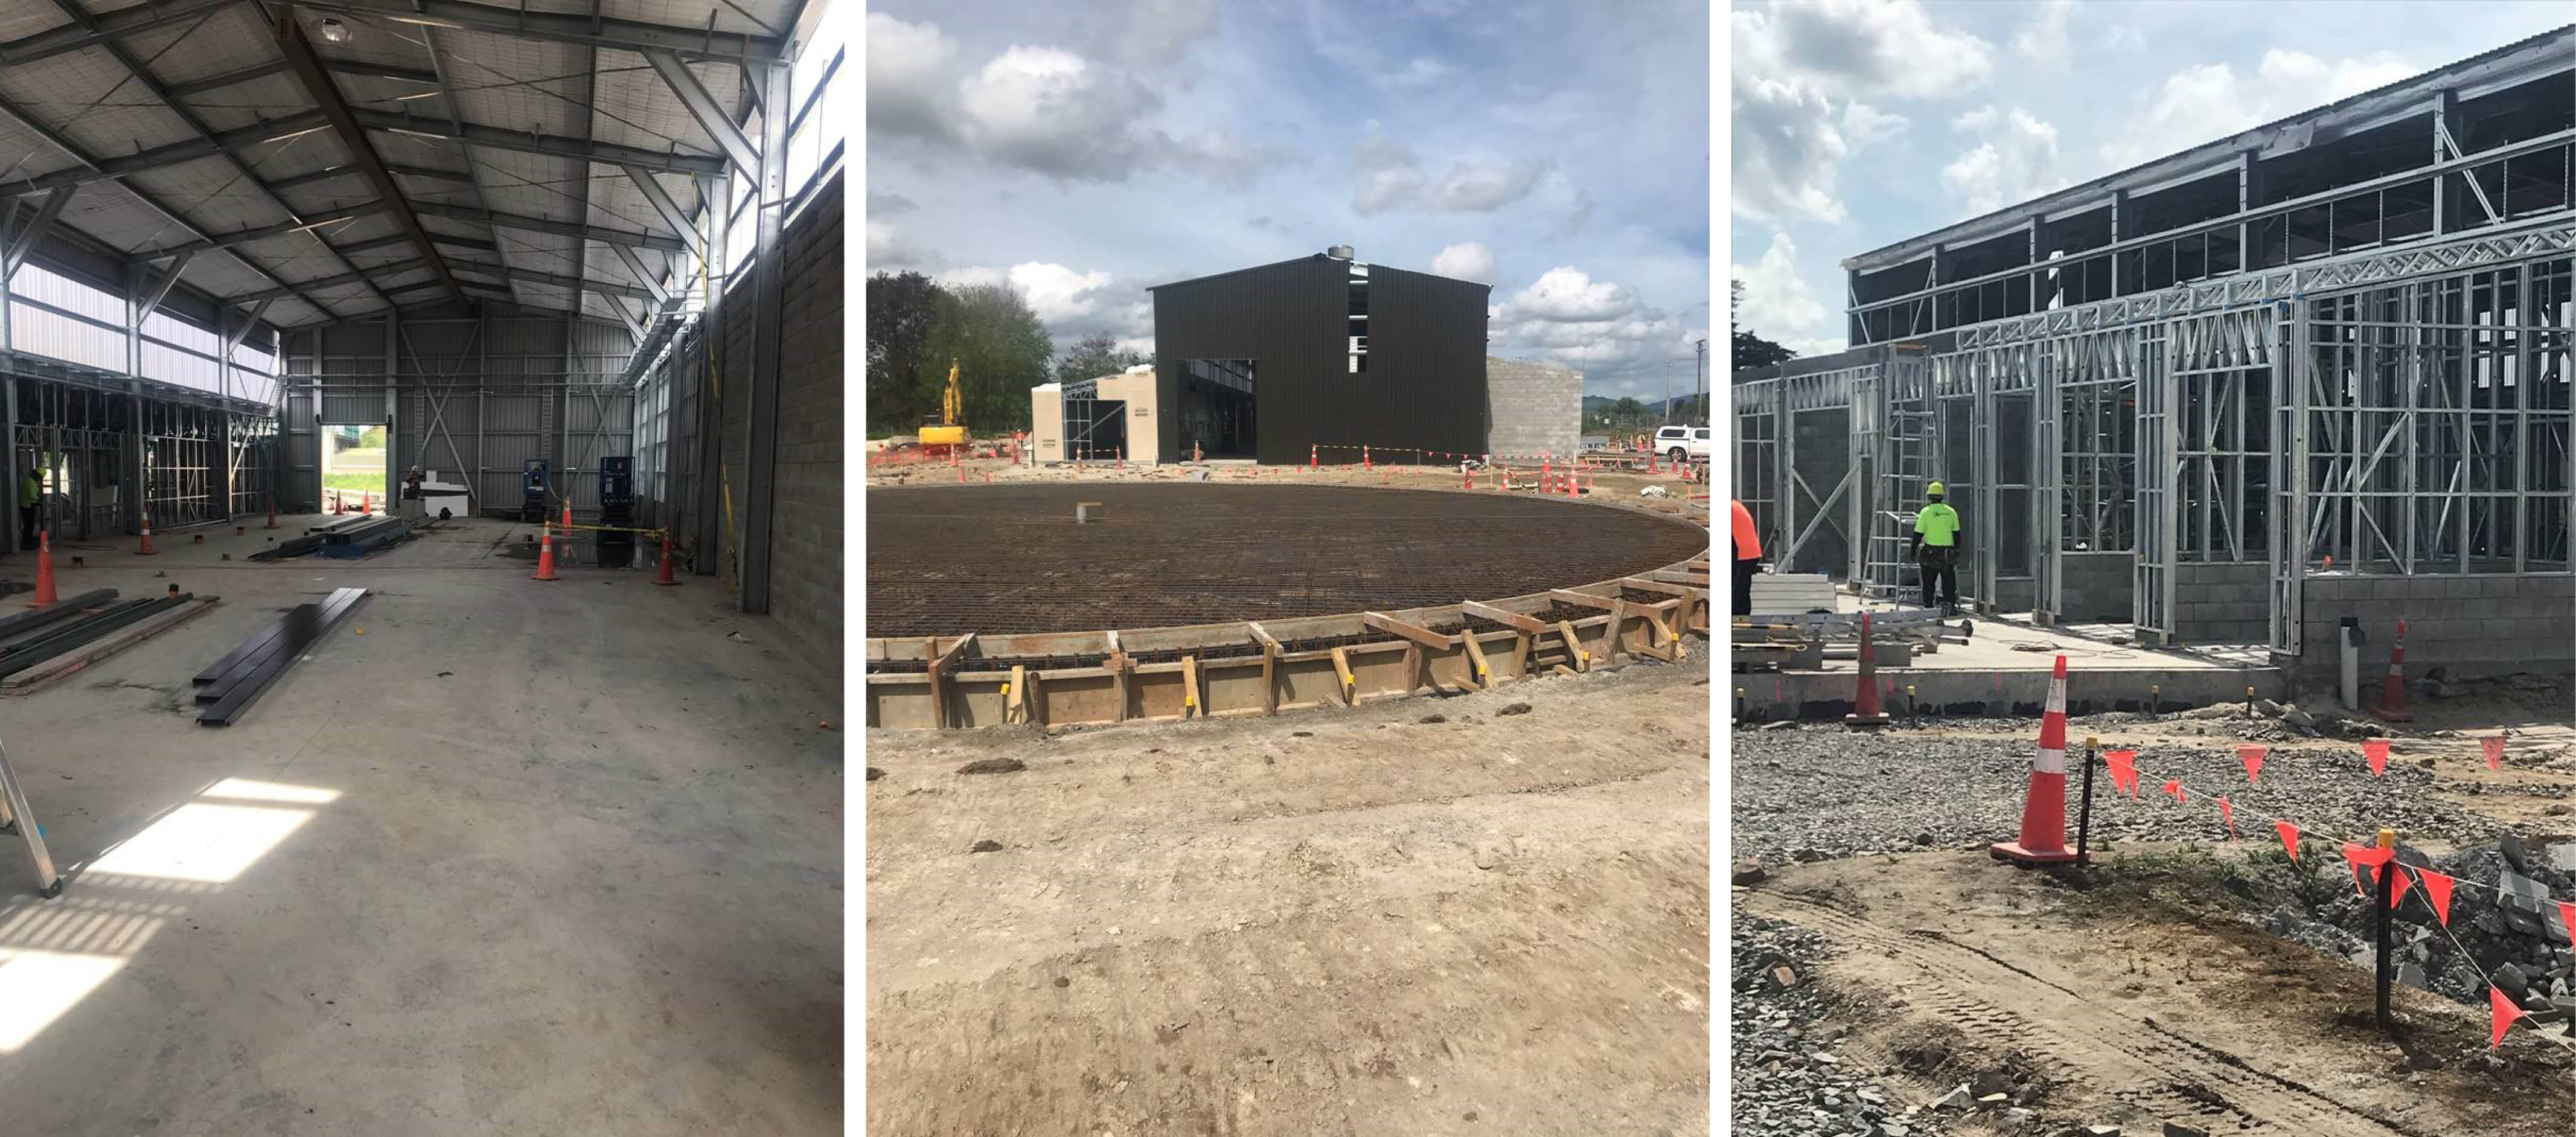 Progress is going well on stage three of the Te Awamutu Water Supply project, with the new chemical storage facility framework done and the reservoir base ready for pouring.